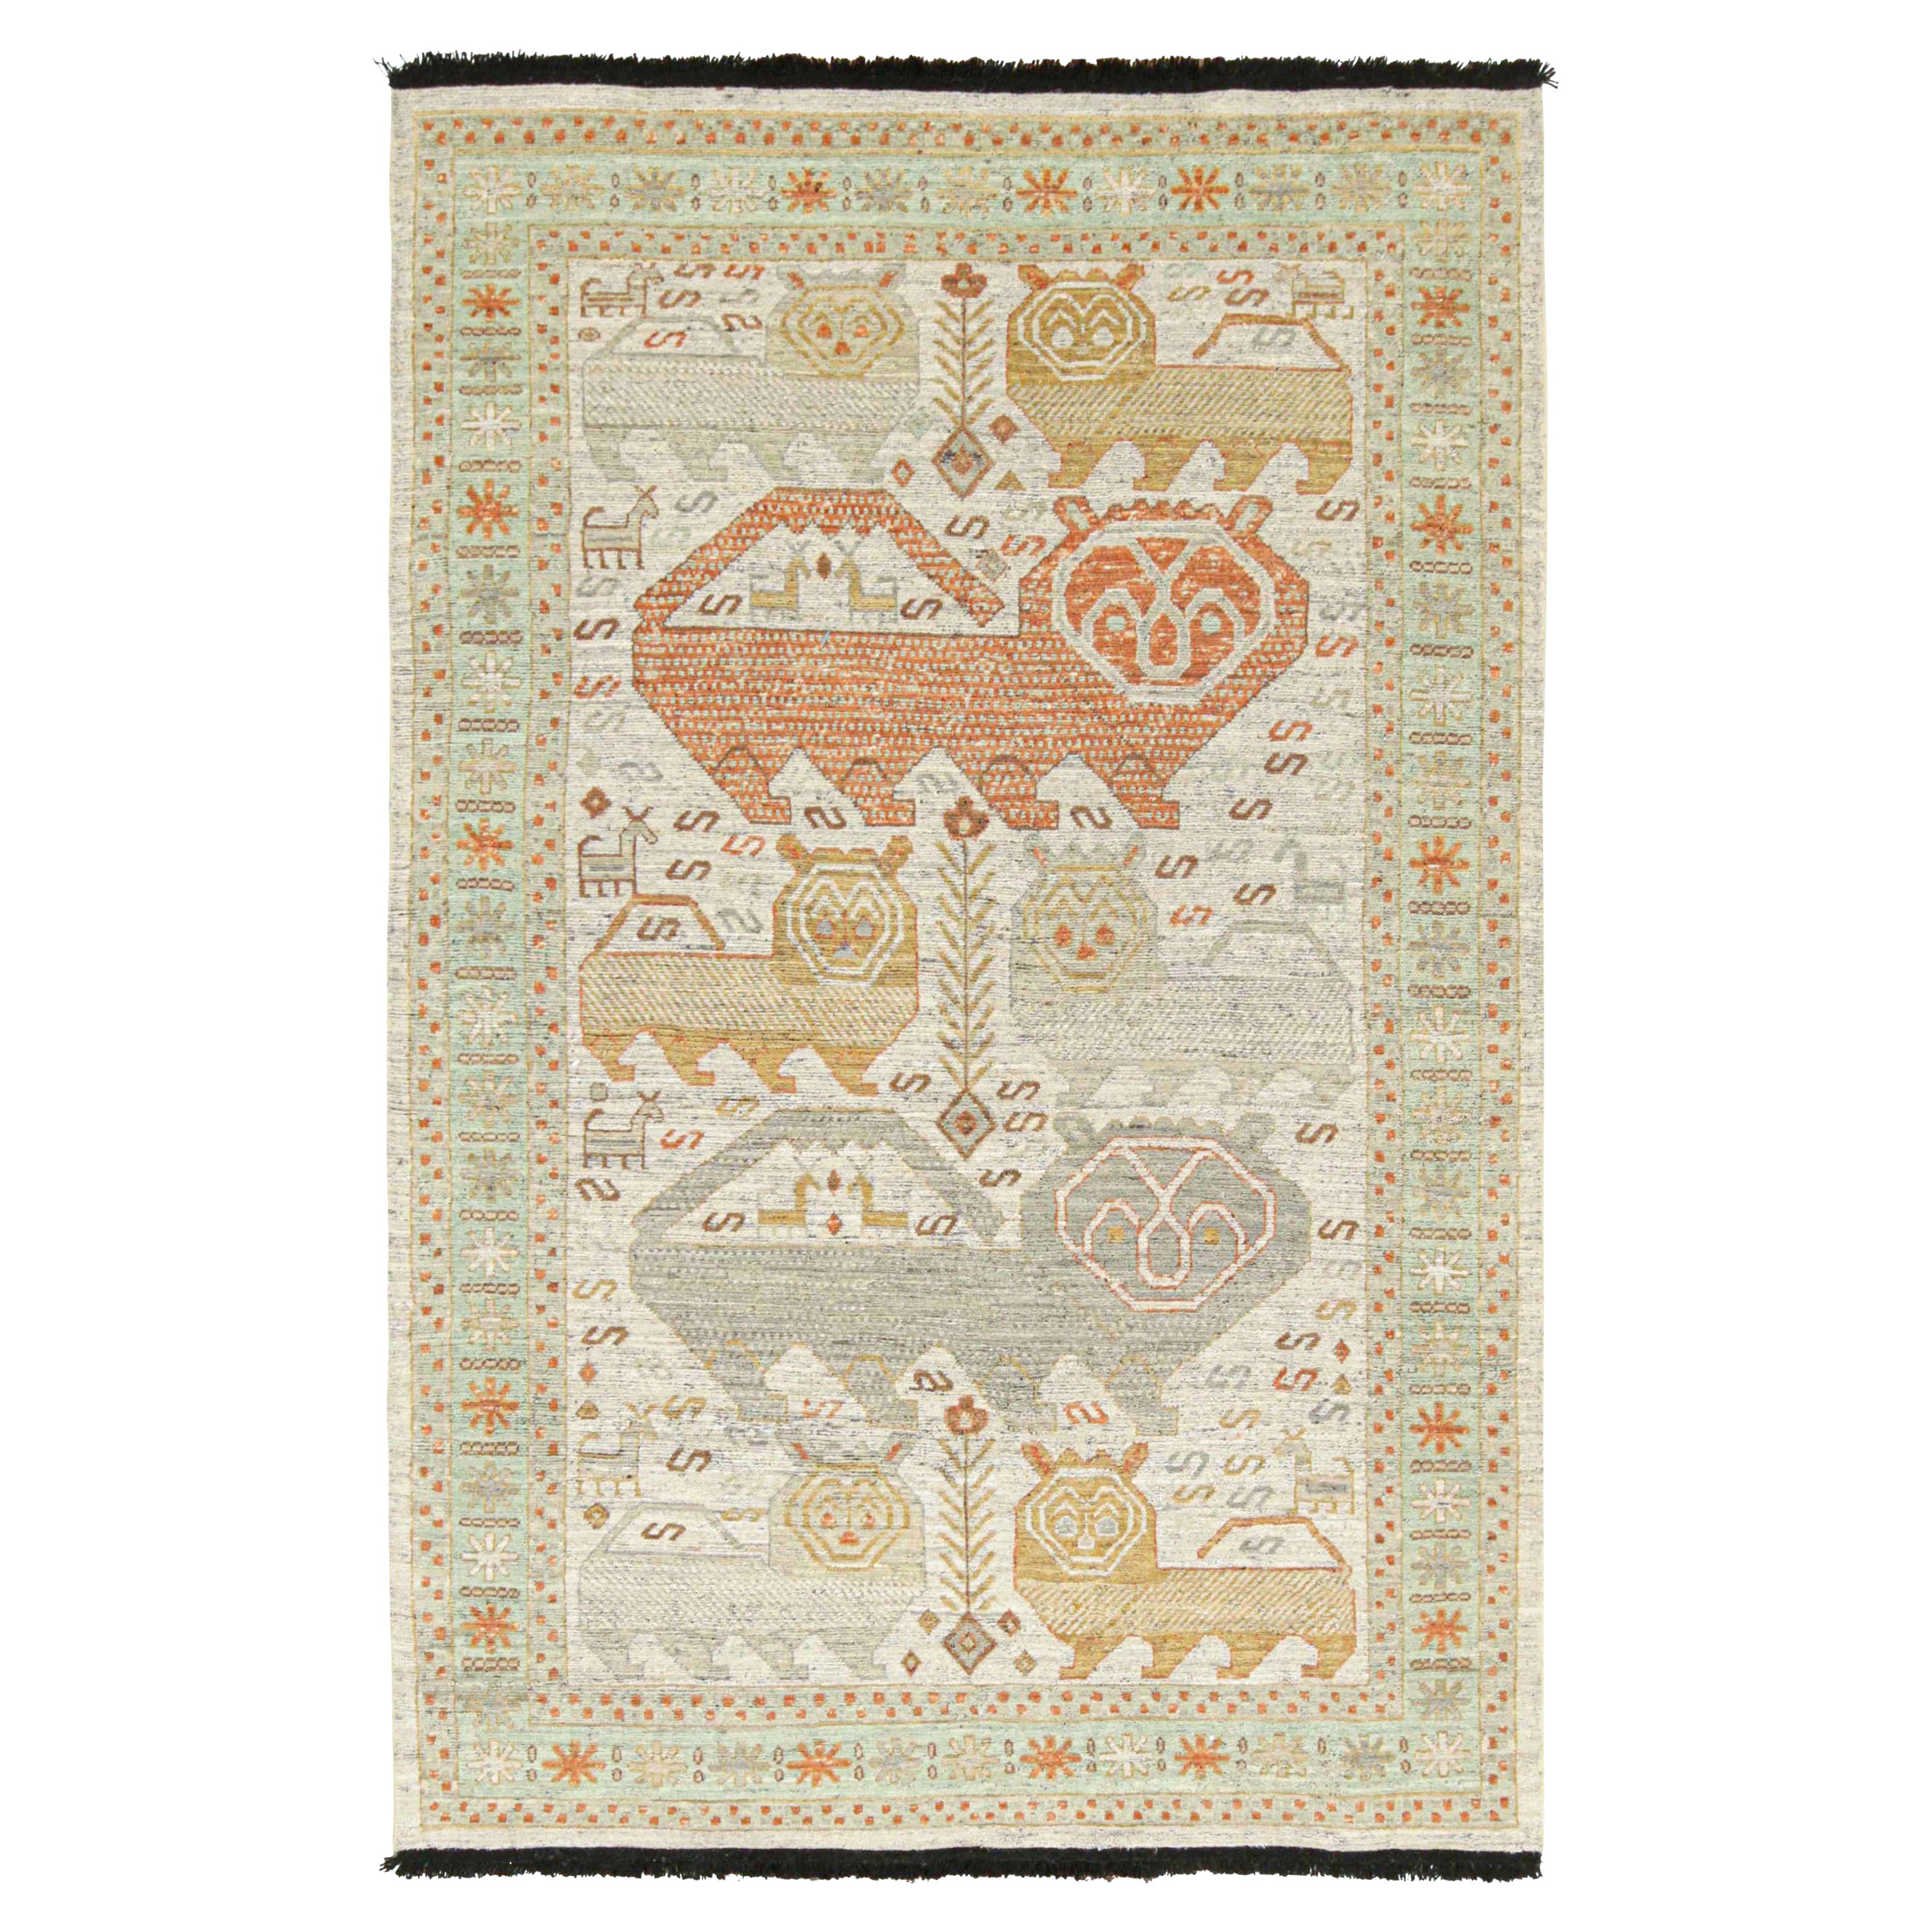 Rug & Kilim’s Tribal Style Rug in Polychromatic Lion Pictorials